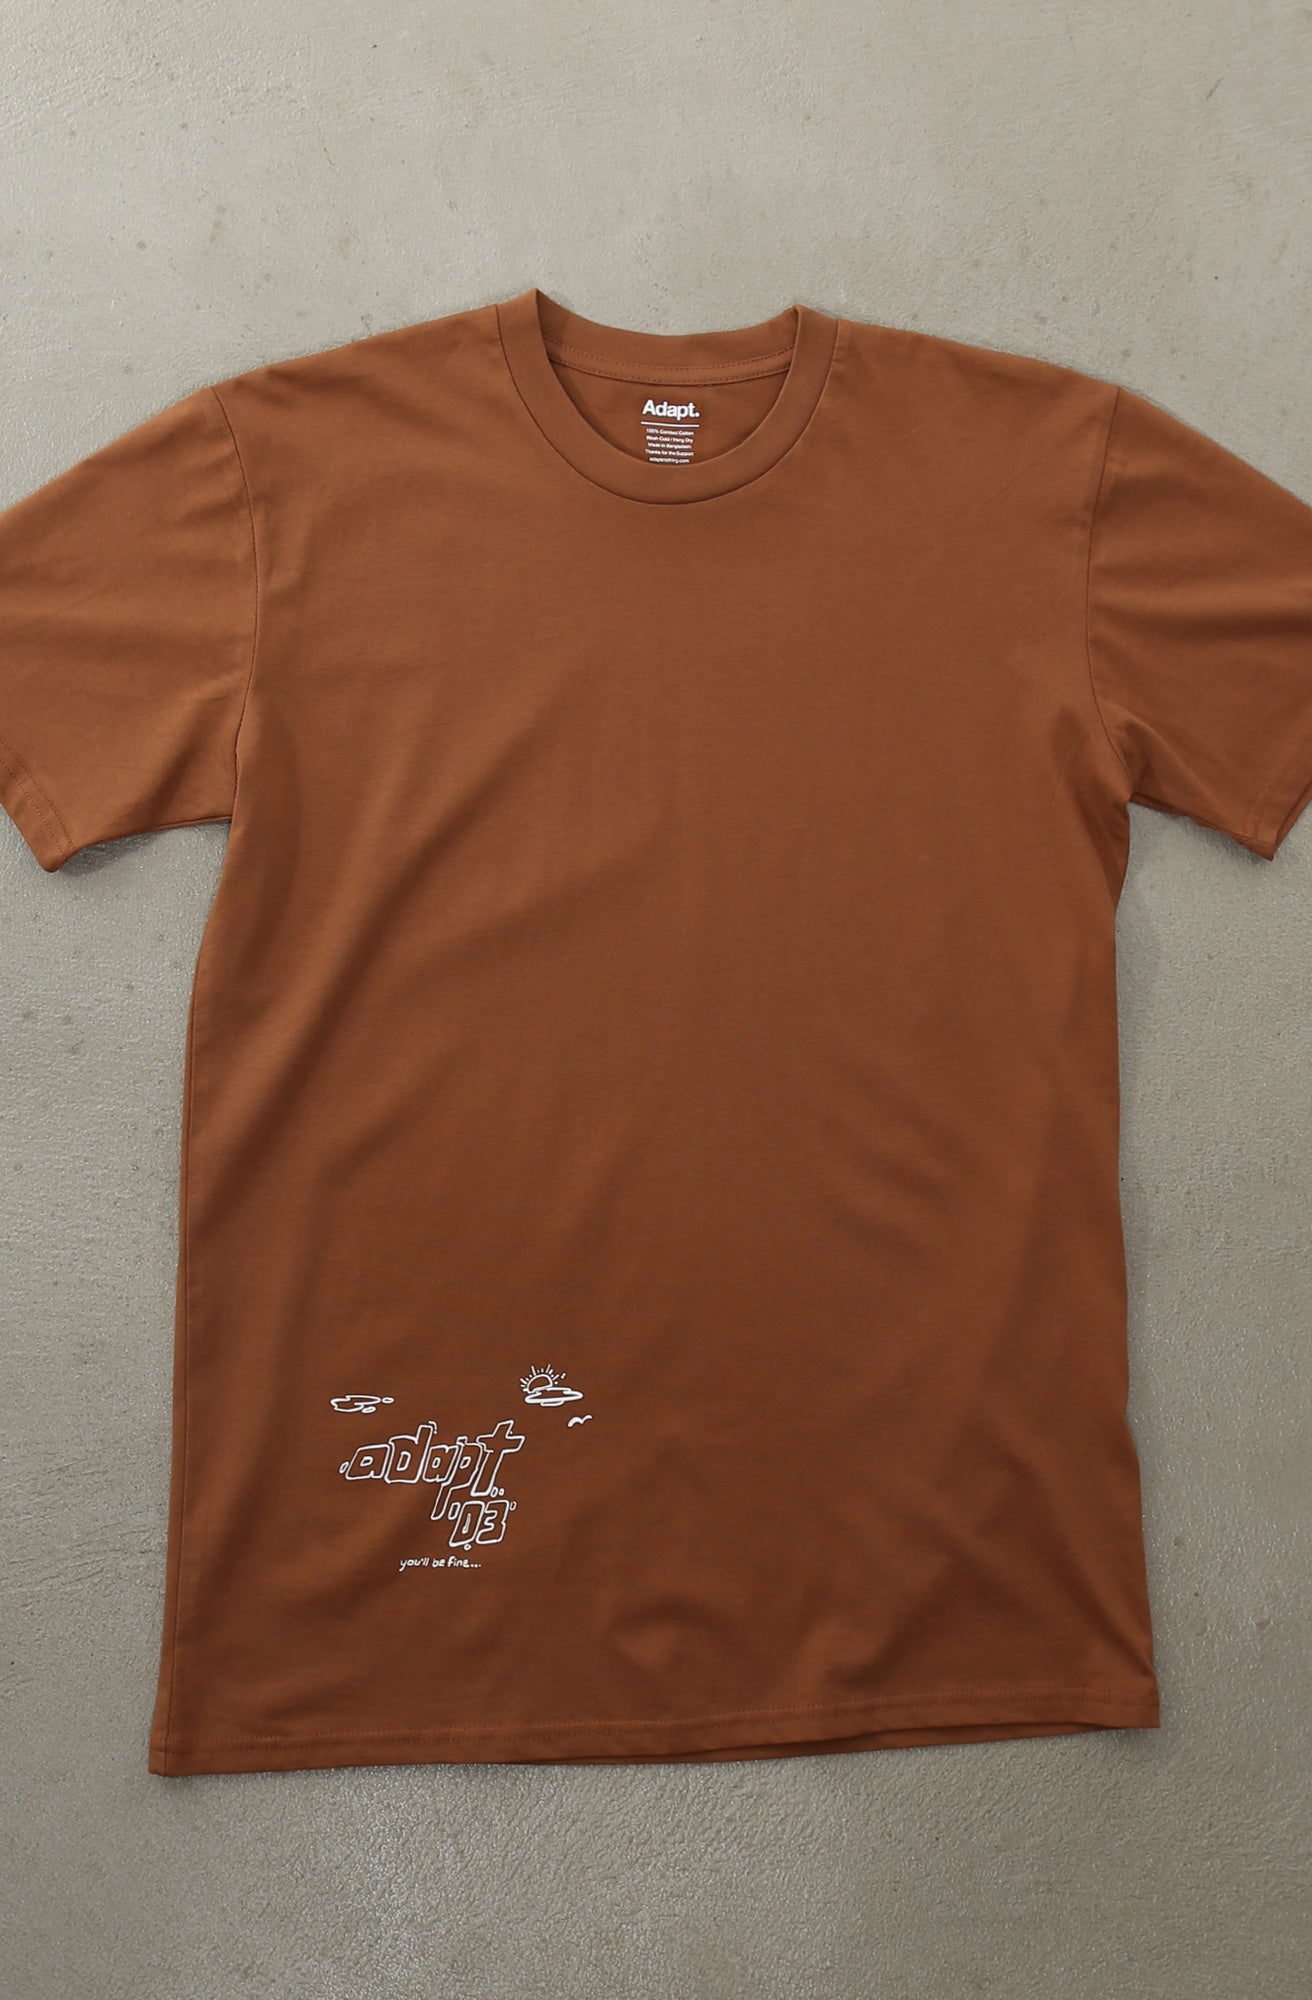 By Your Side (Men's Cocoa A1 Tee)